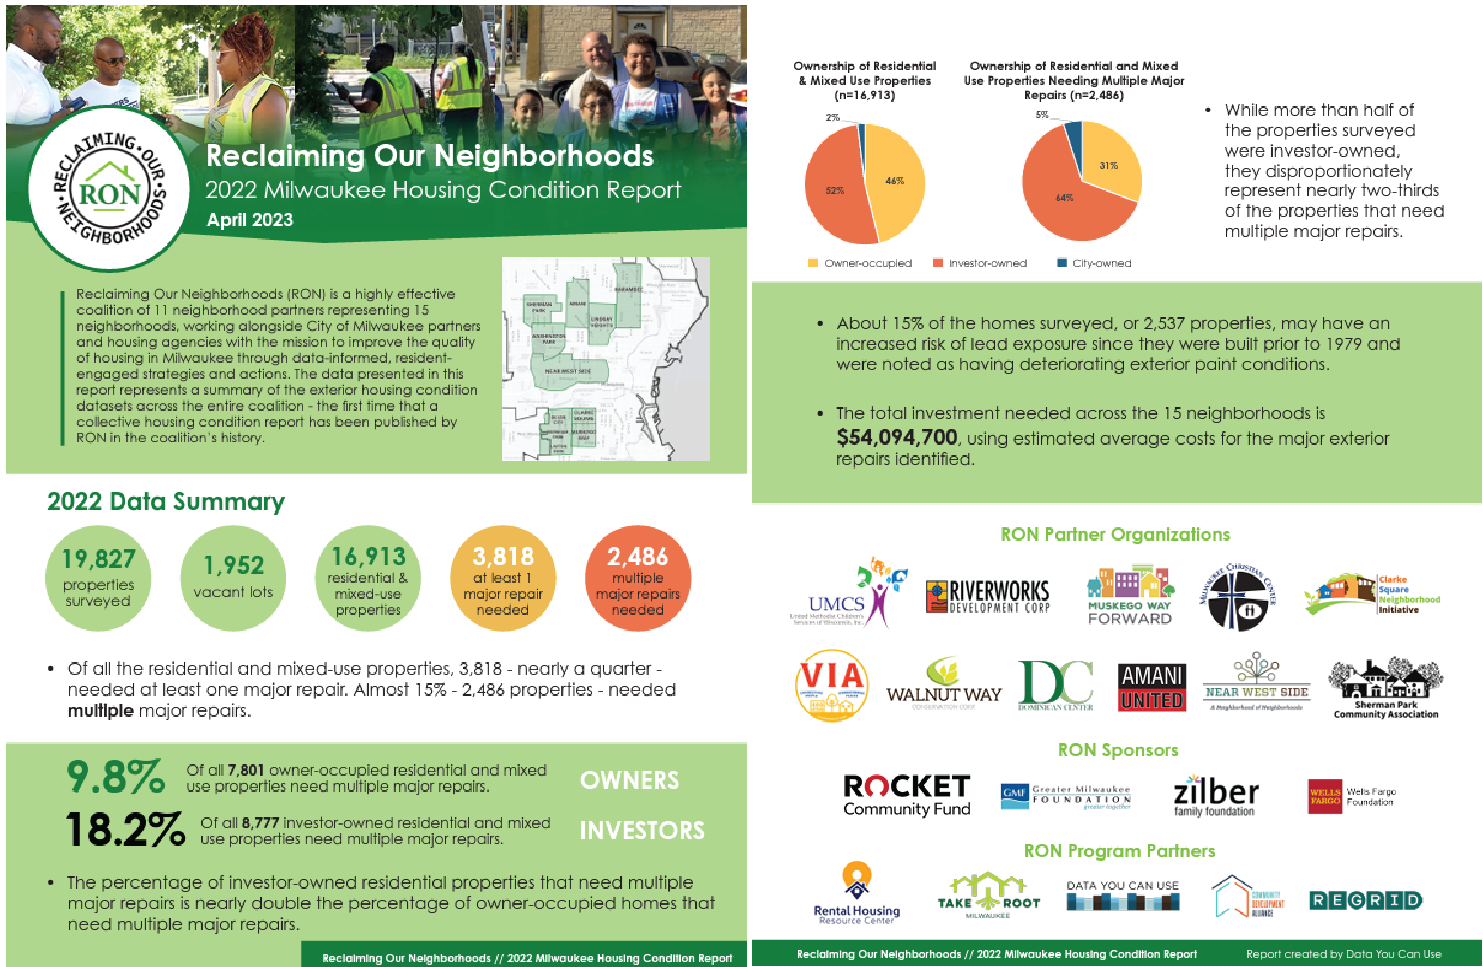 News Release: Data You Can Use and Reclaiming Our Neighborhoods Coalition Release Results of Comprehensive Parcel Survey Assessing Milwaukee Housing Conditions